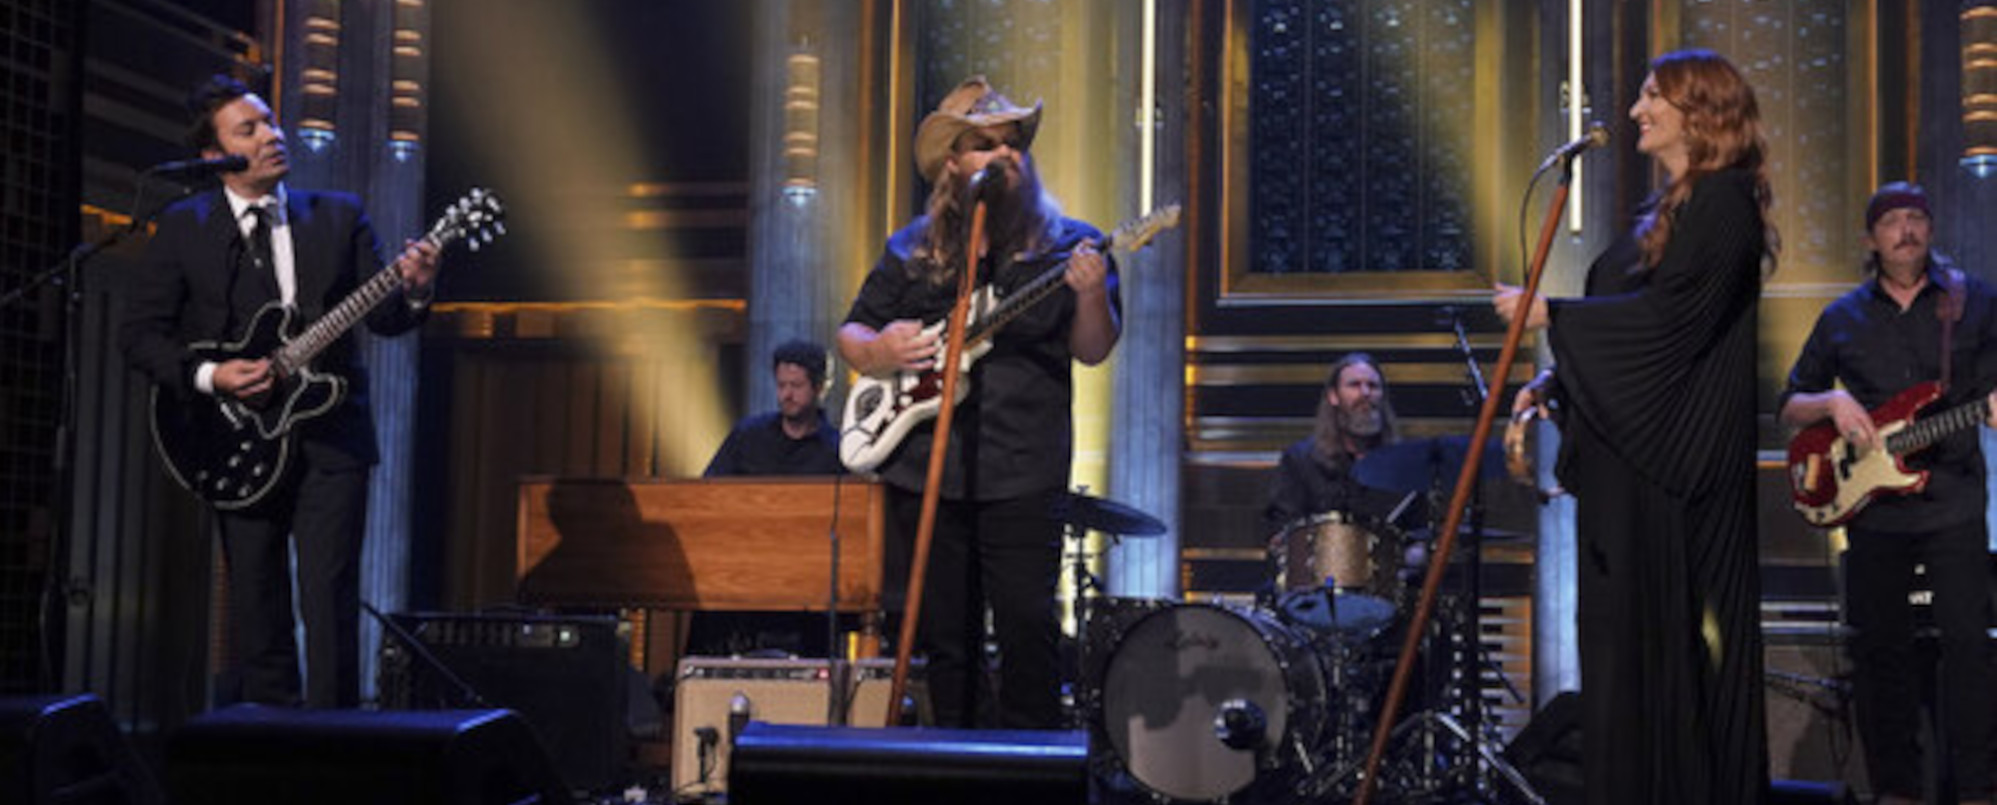 Chris Stapleton Invites Jimmy Fallon to Play Guitar on “You Should Probably Leave” During ‘Tonight Show’ Performance